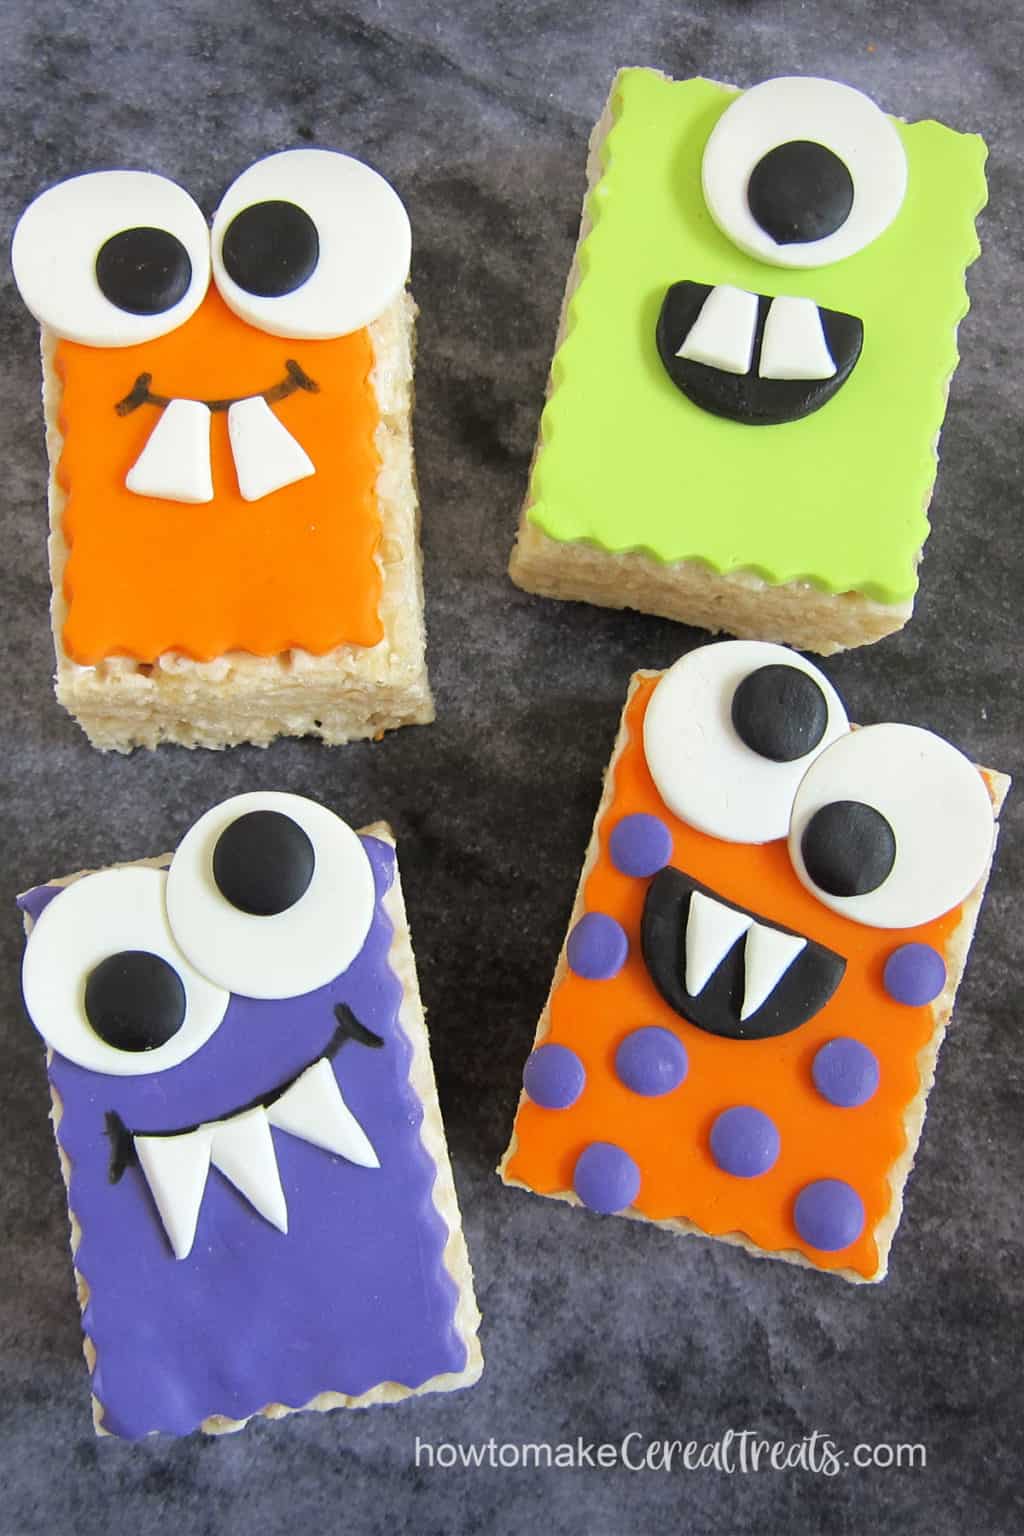 Rice Krispie Treat Monsters | howtomakecerealtreats.com